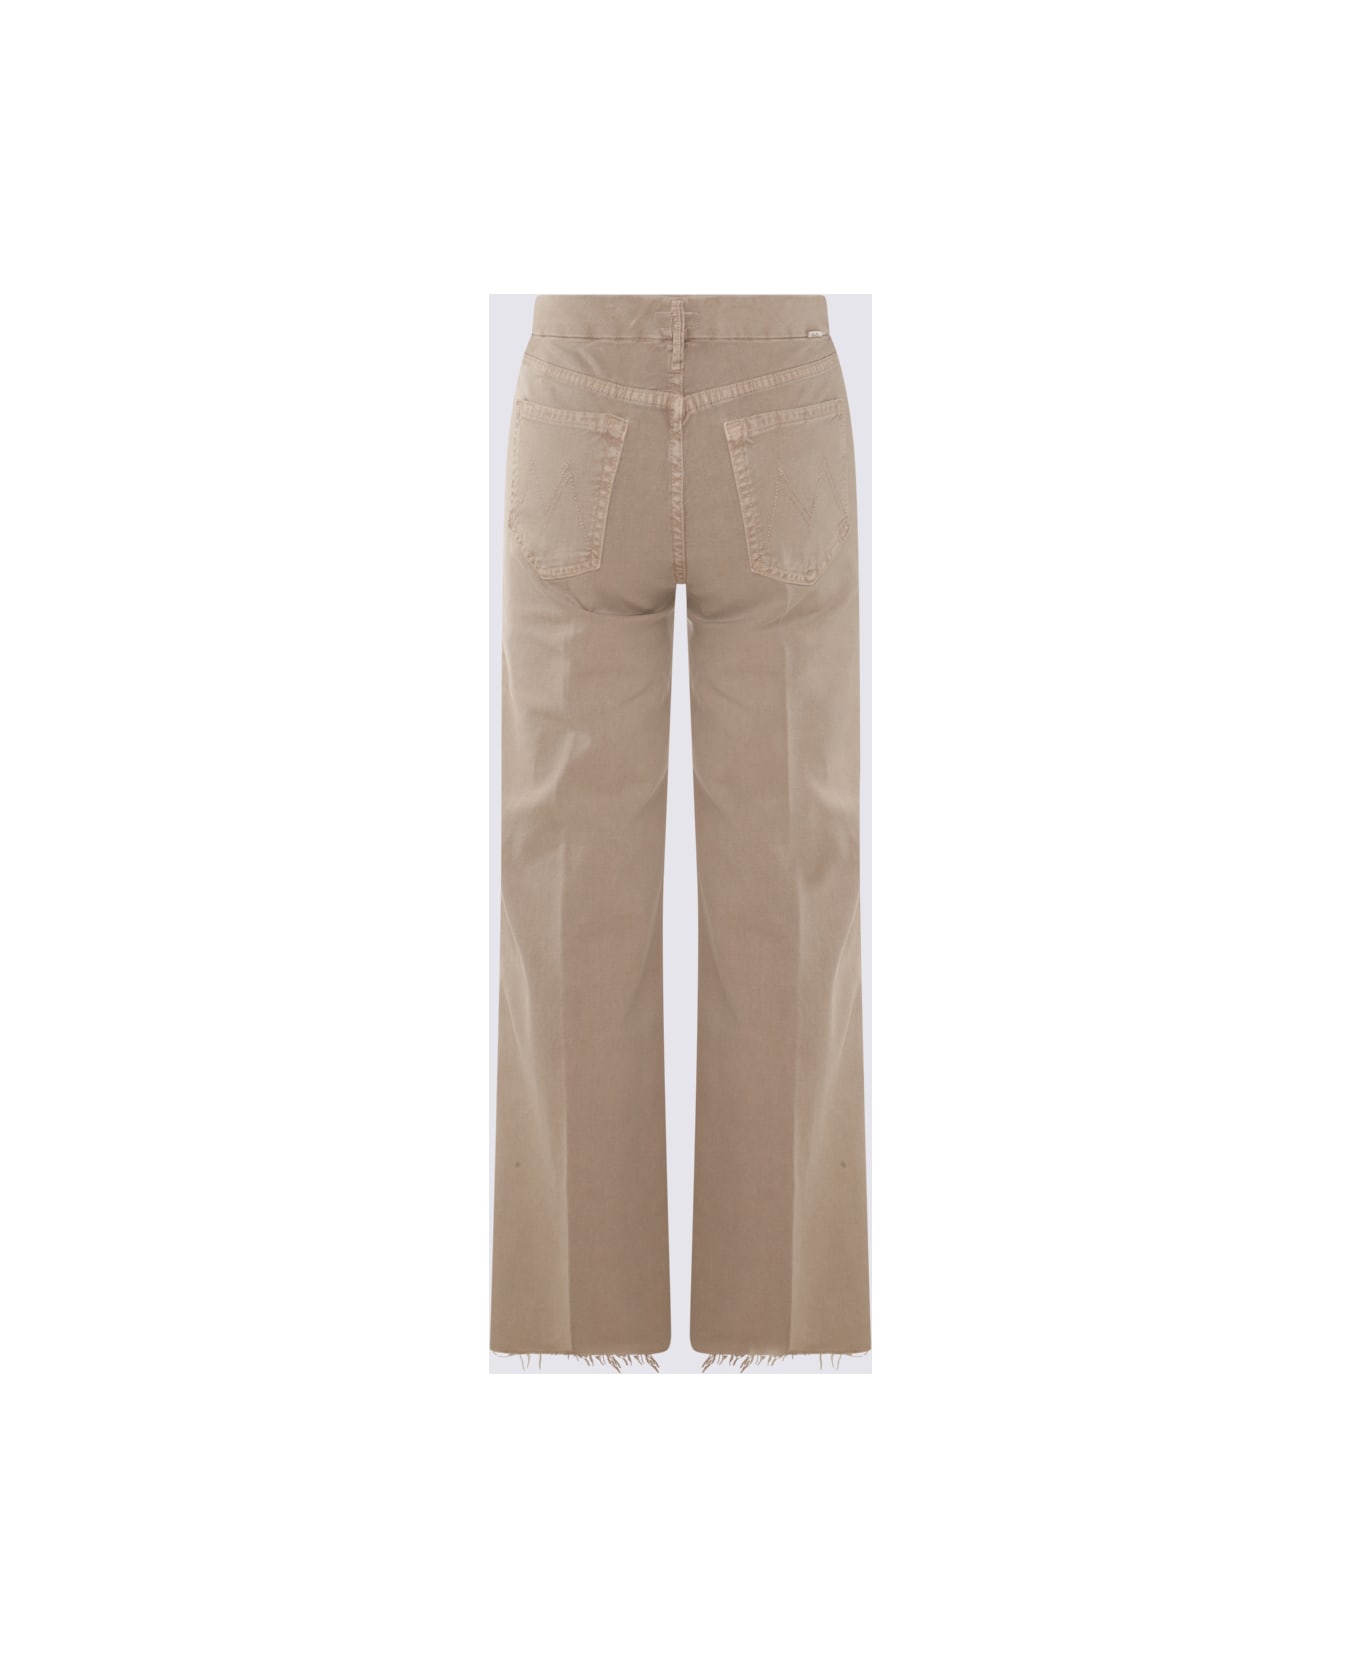 Mother Beige Cotton Blend Jeans - AGATE GREY ボトムス